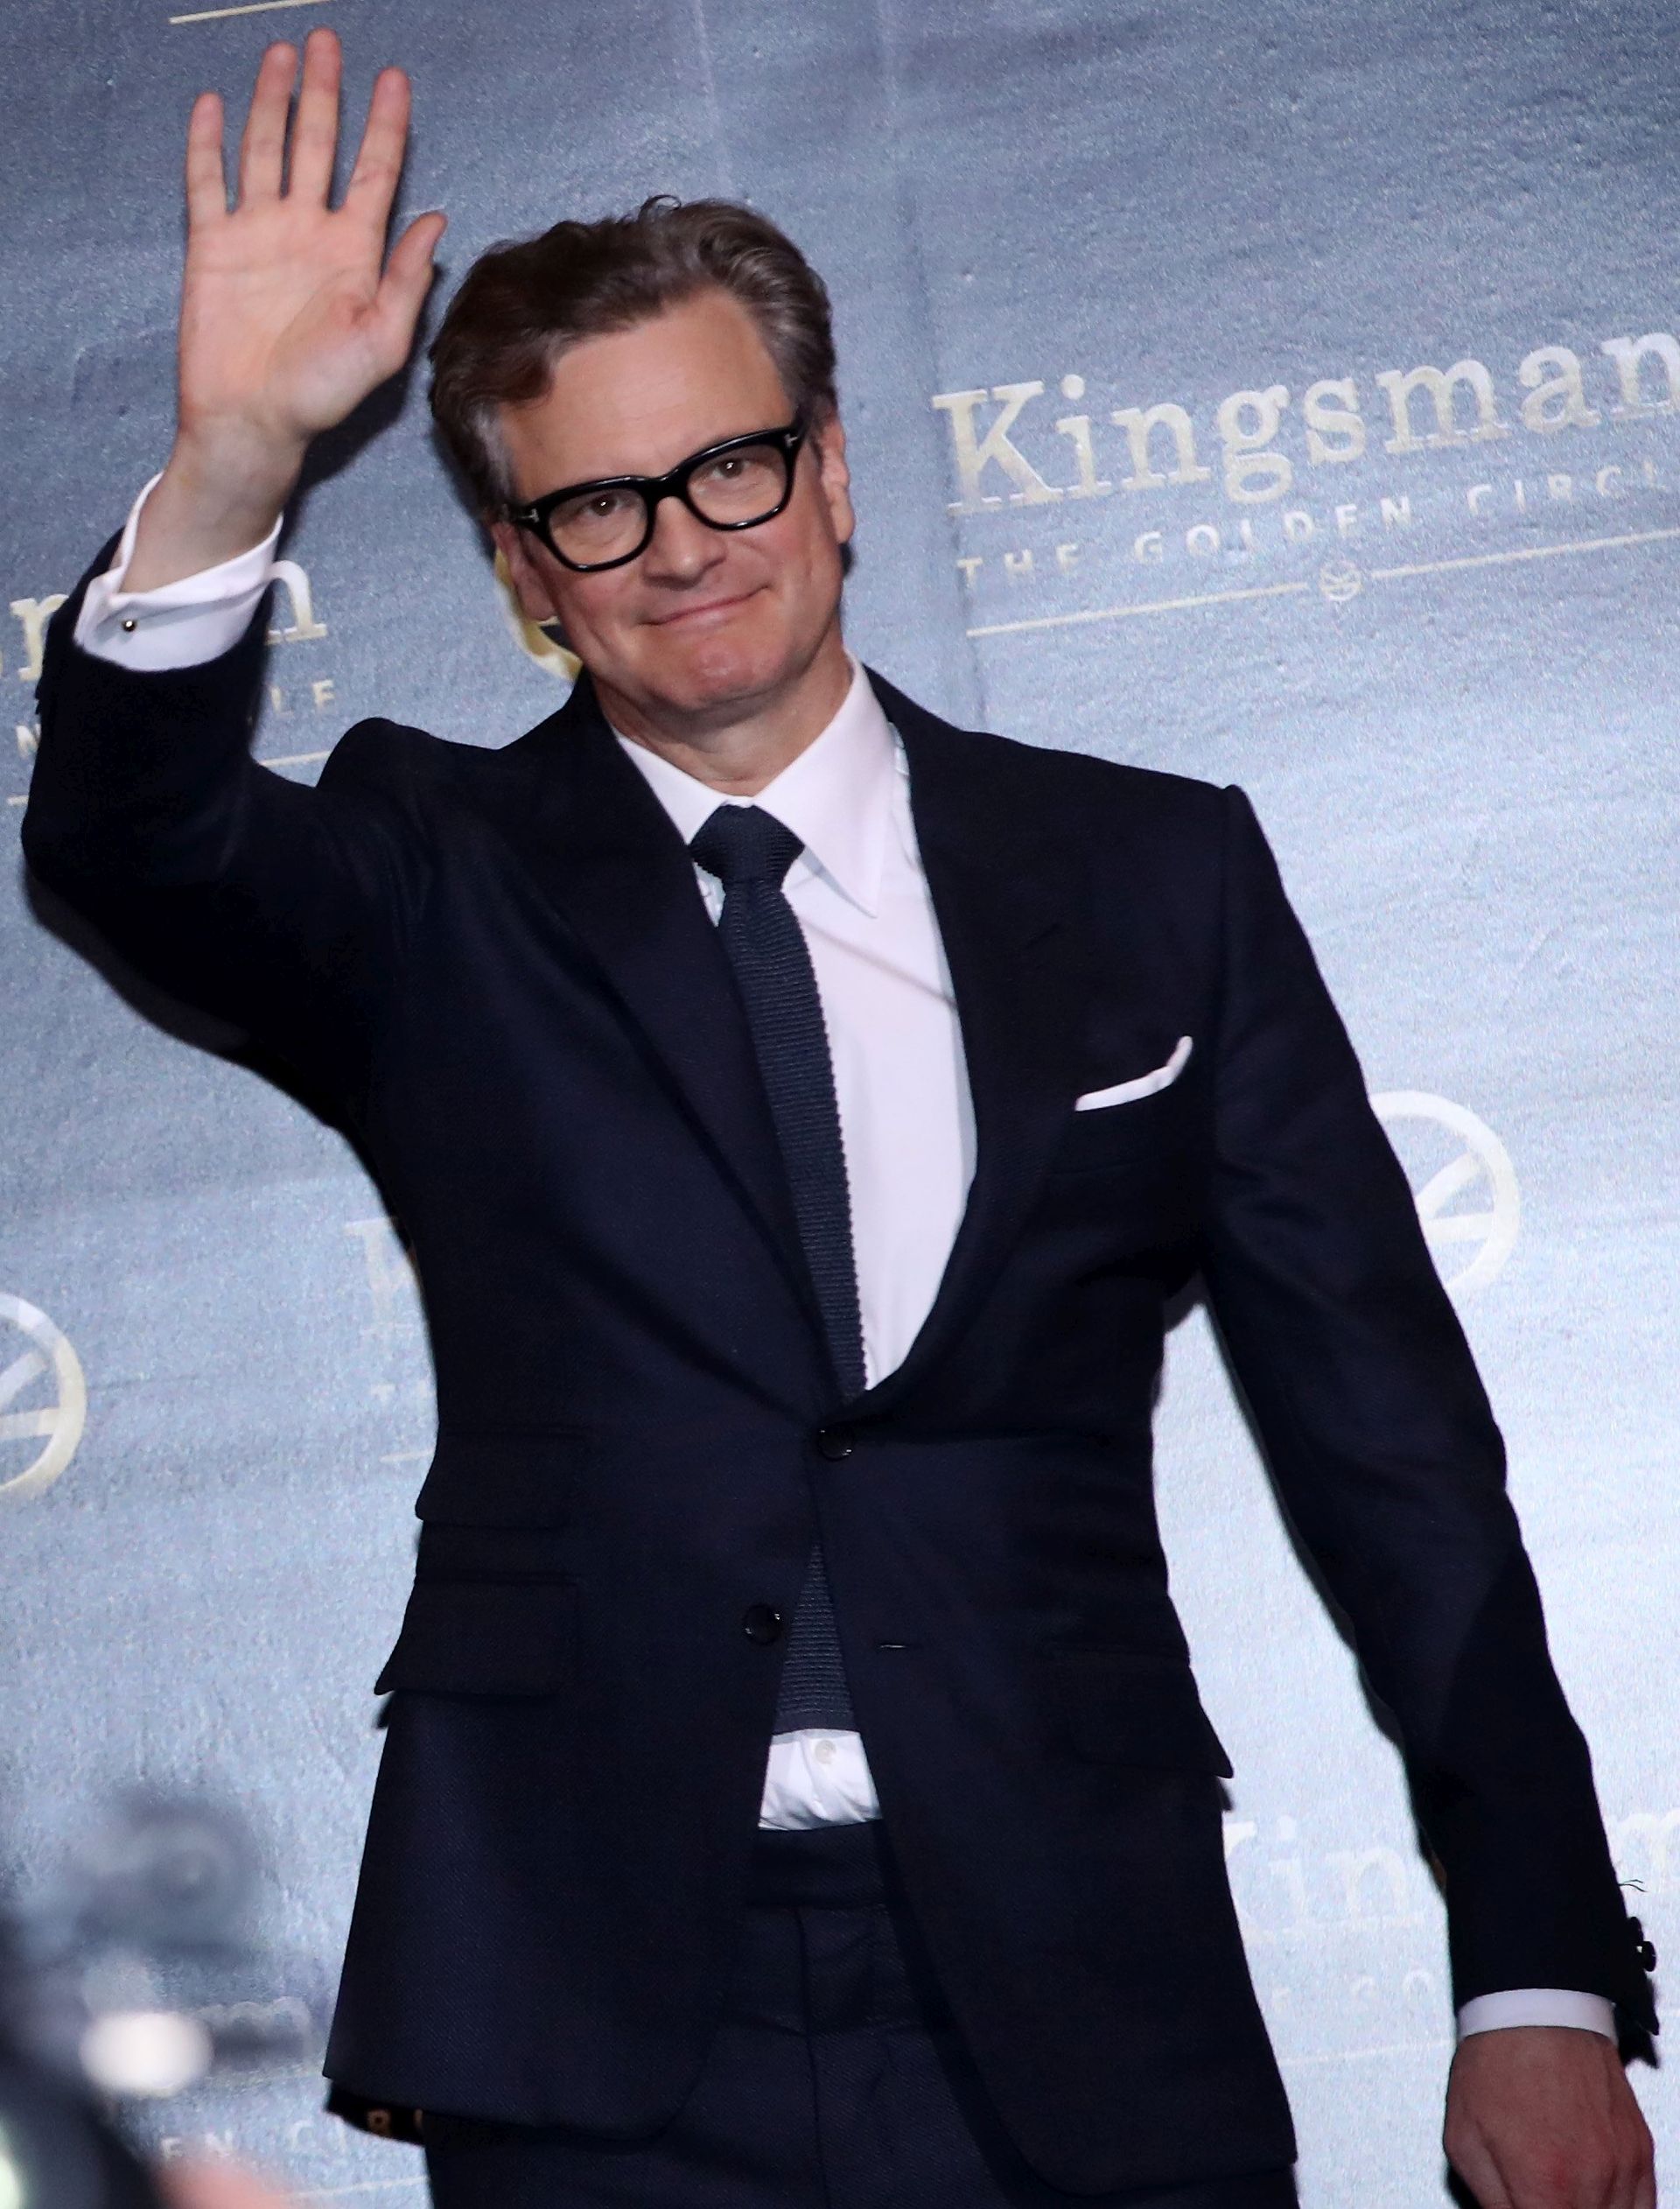 epa06216931 British actor Colin Firth, the star of the new movie 'Kingsman: The Golden Circle,' waves to the fans at a red carpet event for the film in Seoul, South Korea, 20 September 2017 (issued 21 September 2017).  EPA/YONHAP SOUTH KOREA OUT